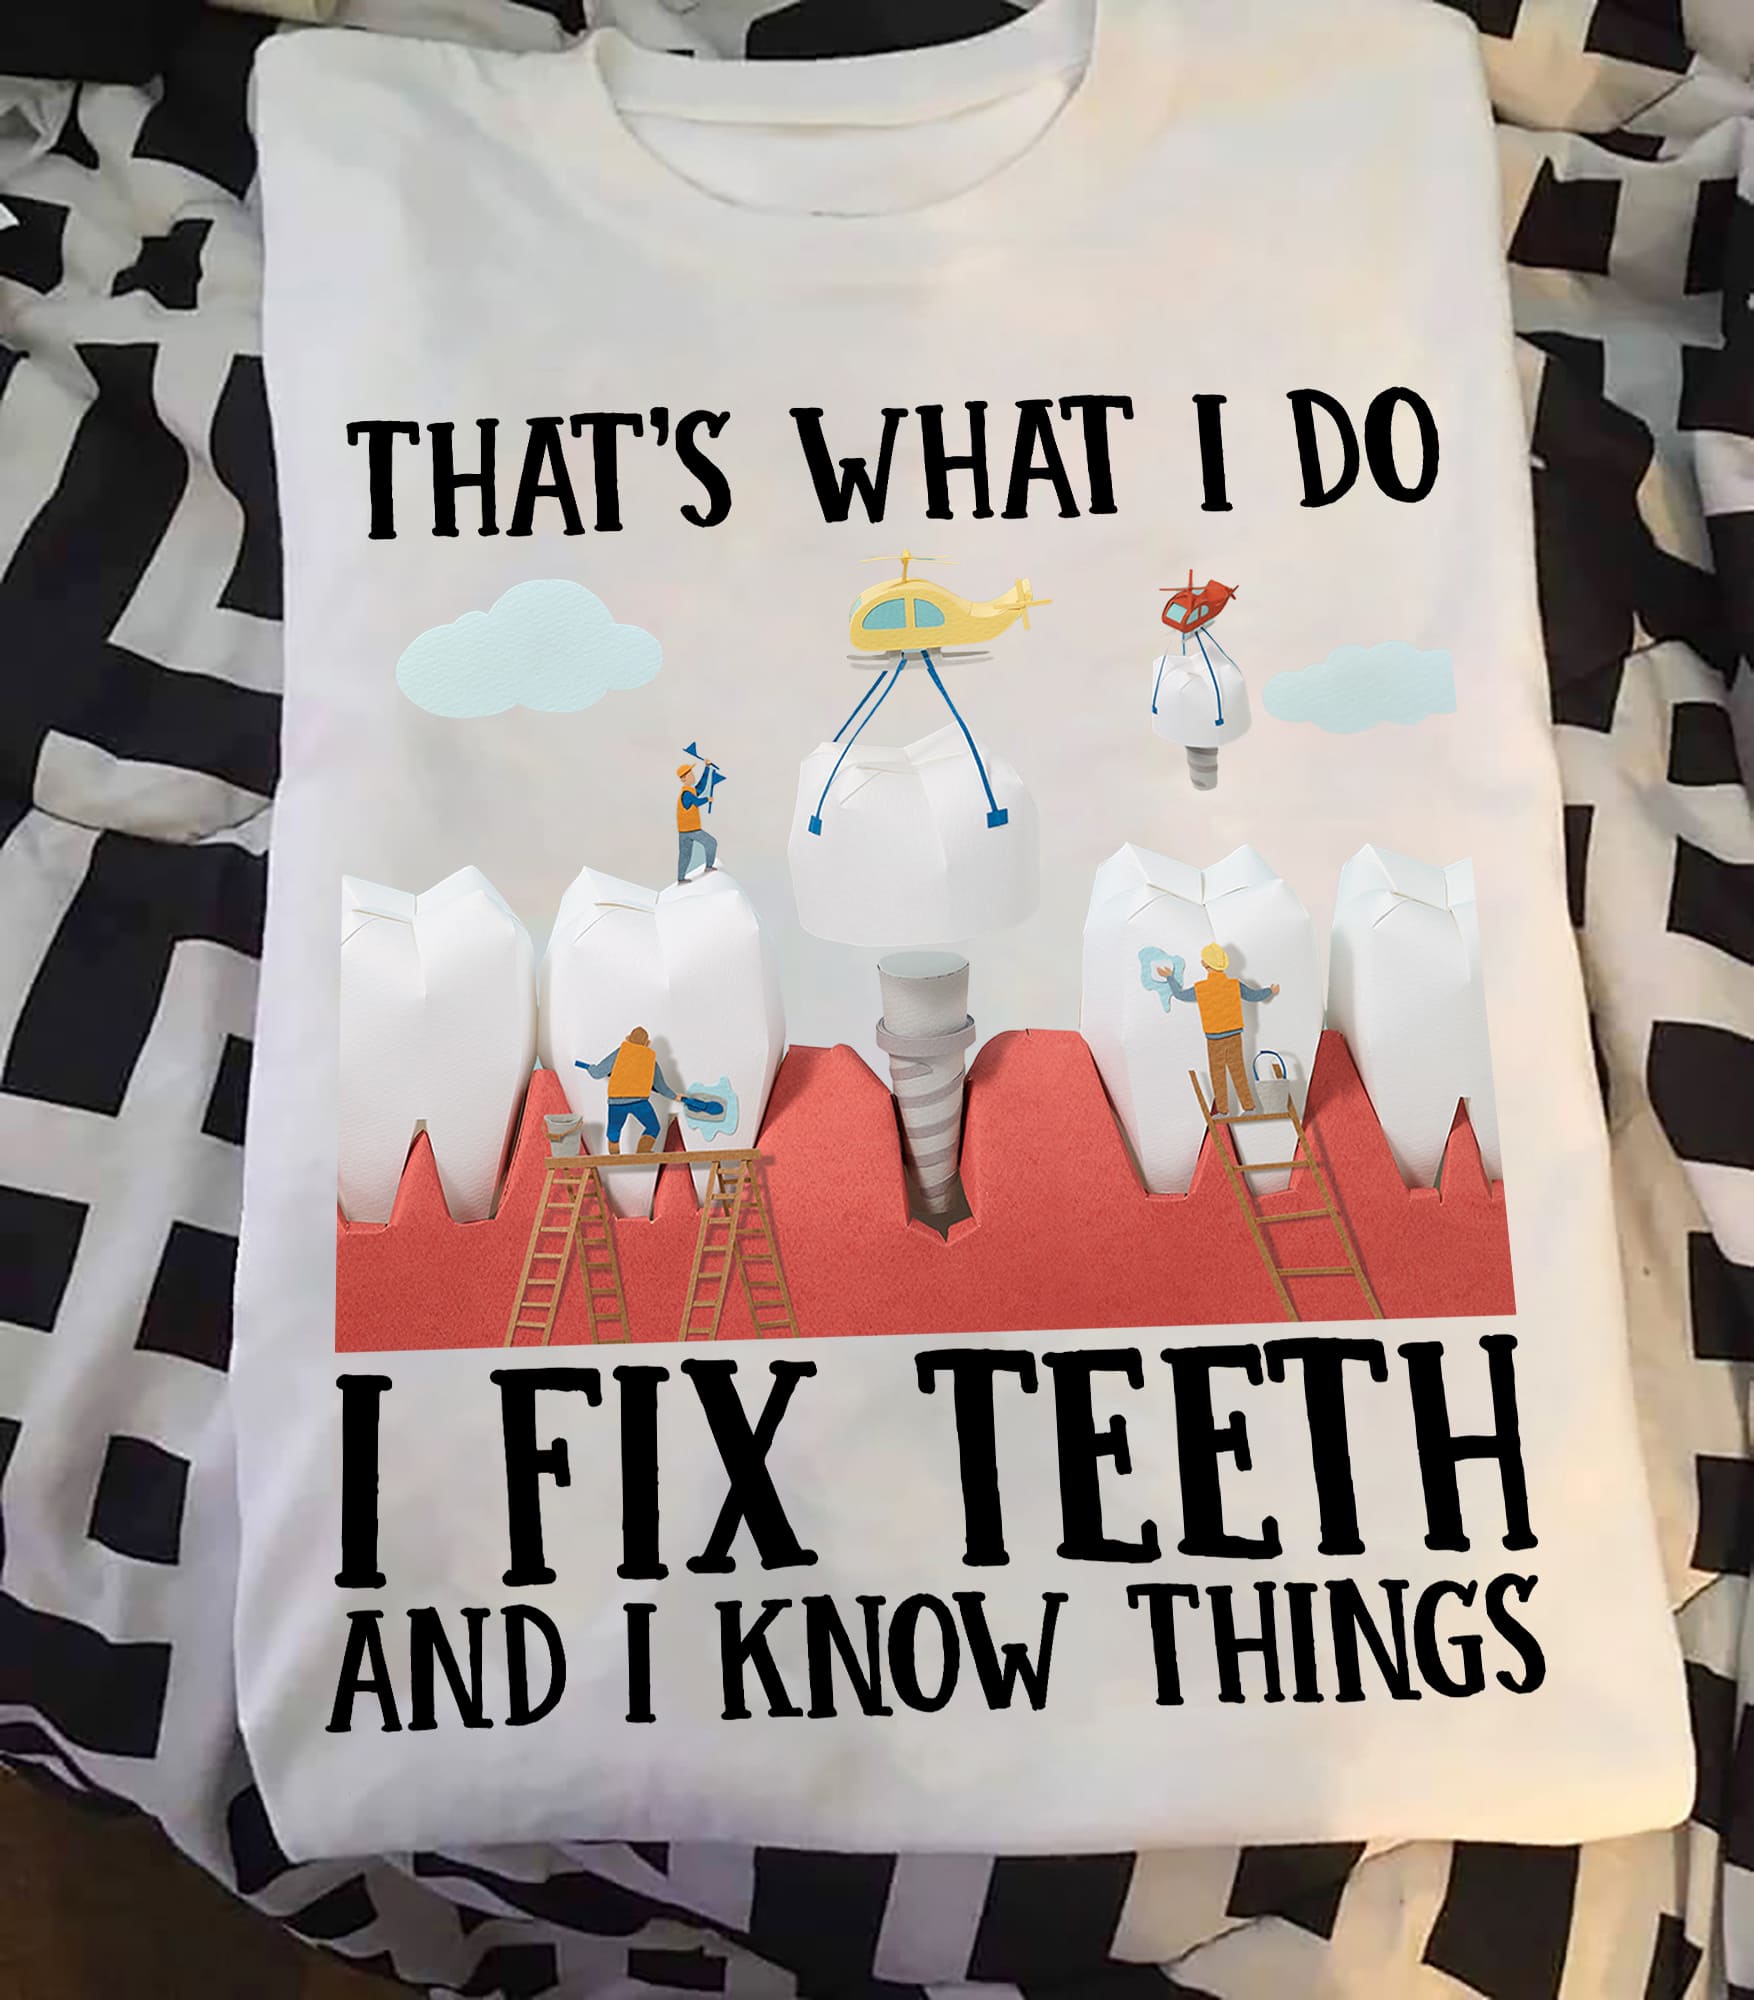 That's what I do I fix teeth and I know things - Gift for dentist, dentist fix your teeth